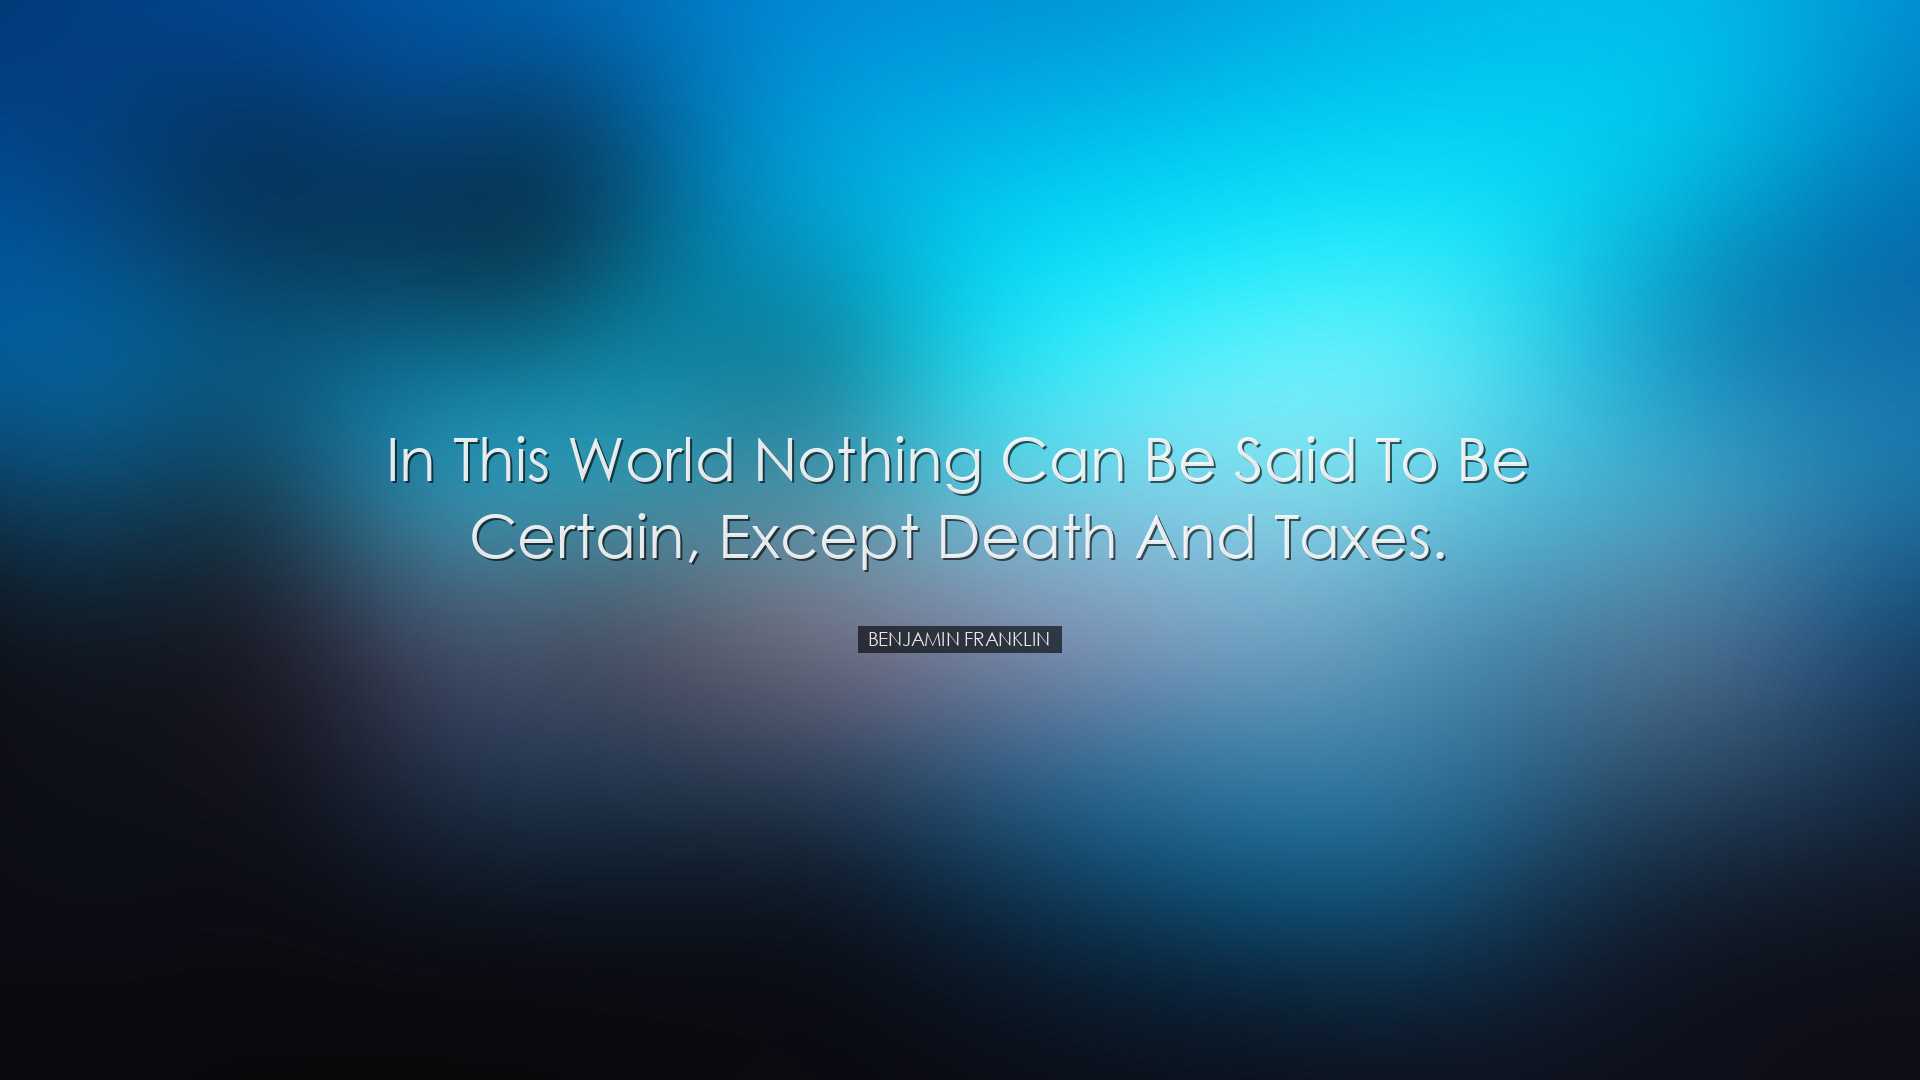 In this world nothing can be said to be certain, except death and